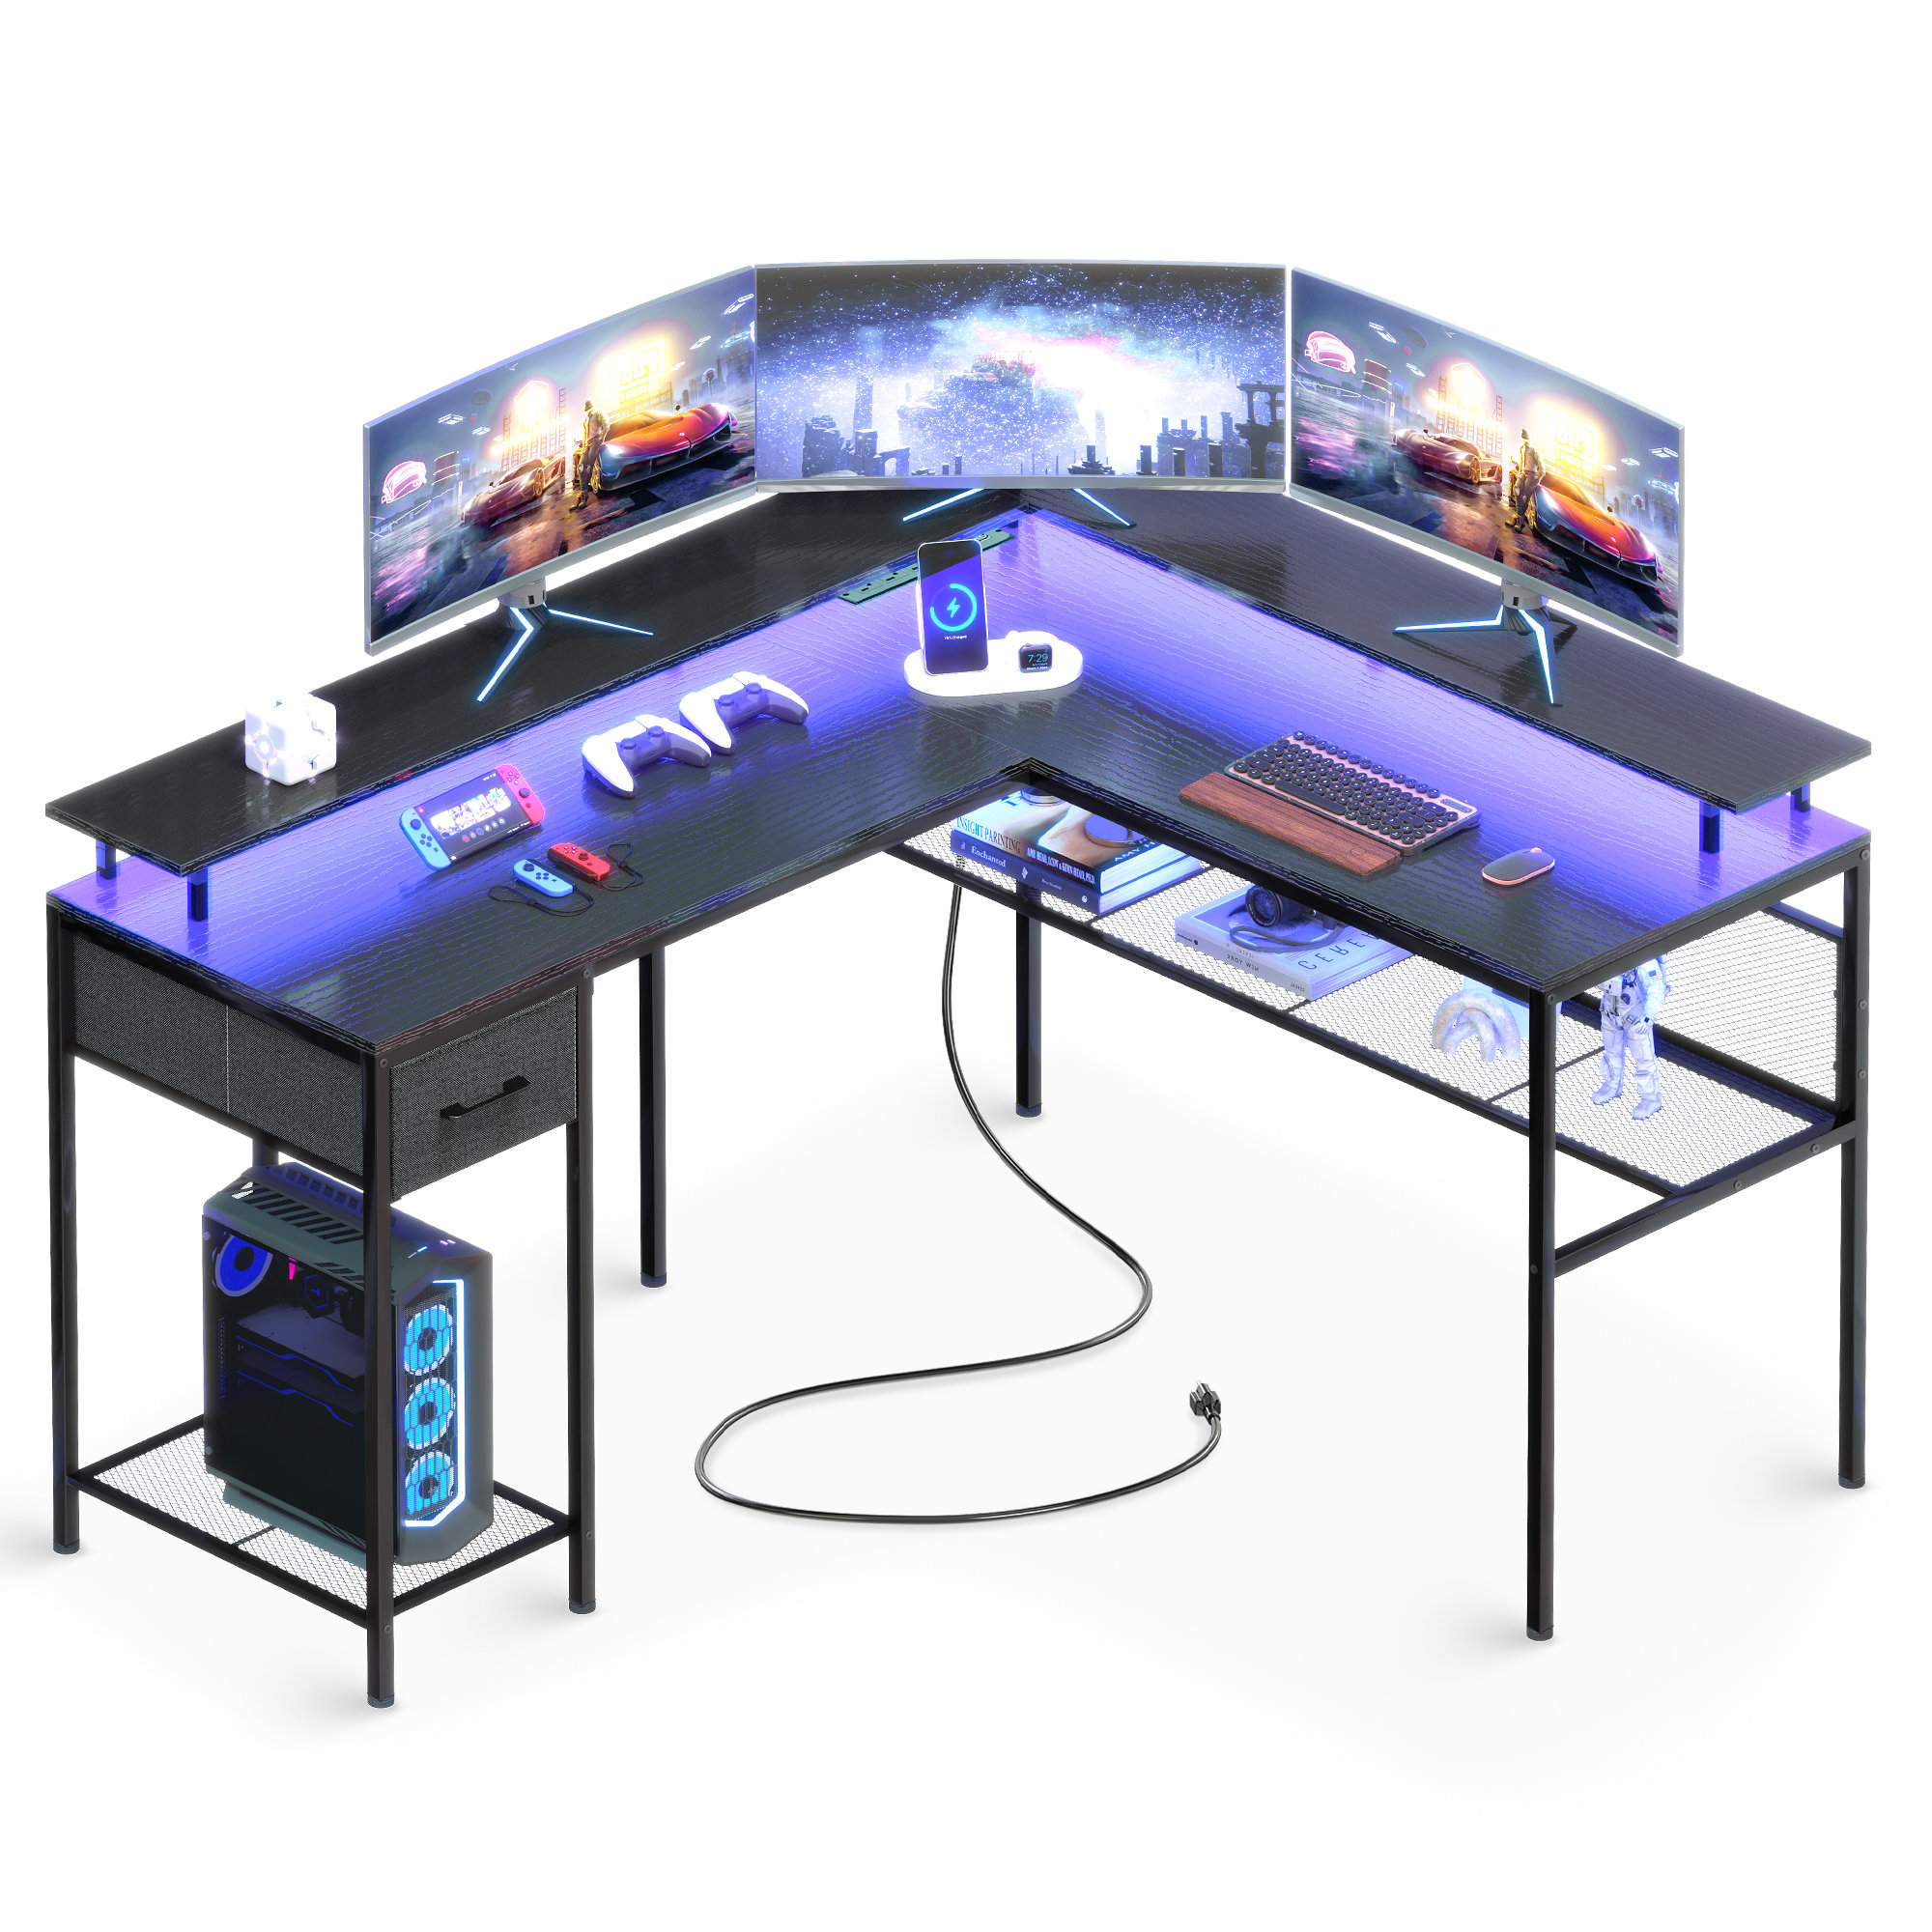  POUT Game Station 1 RGB LED Gaming Desk with LED